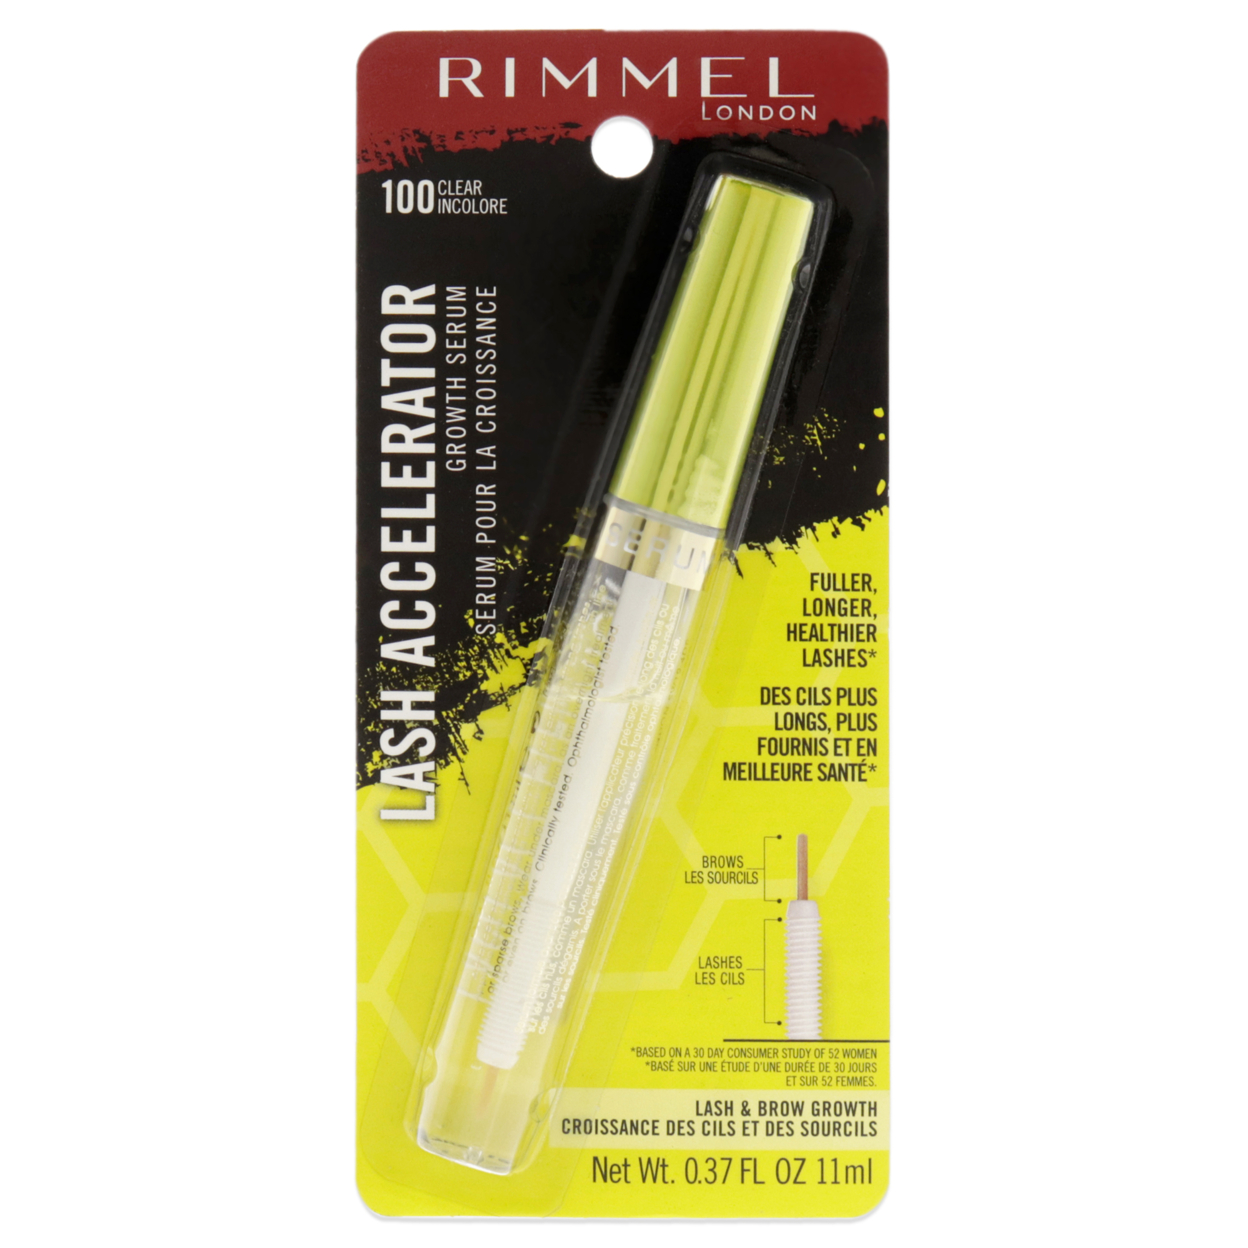 Lash Accelerator Growth Serum - 100 Clear by Rimmel London for Women - 0.37 oz Serum - image 1 of 3